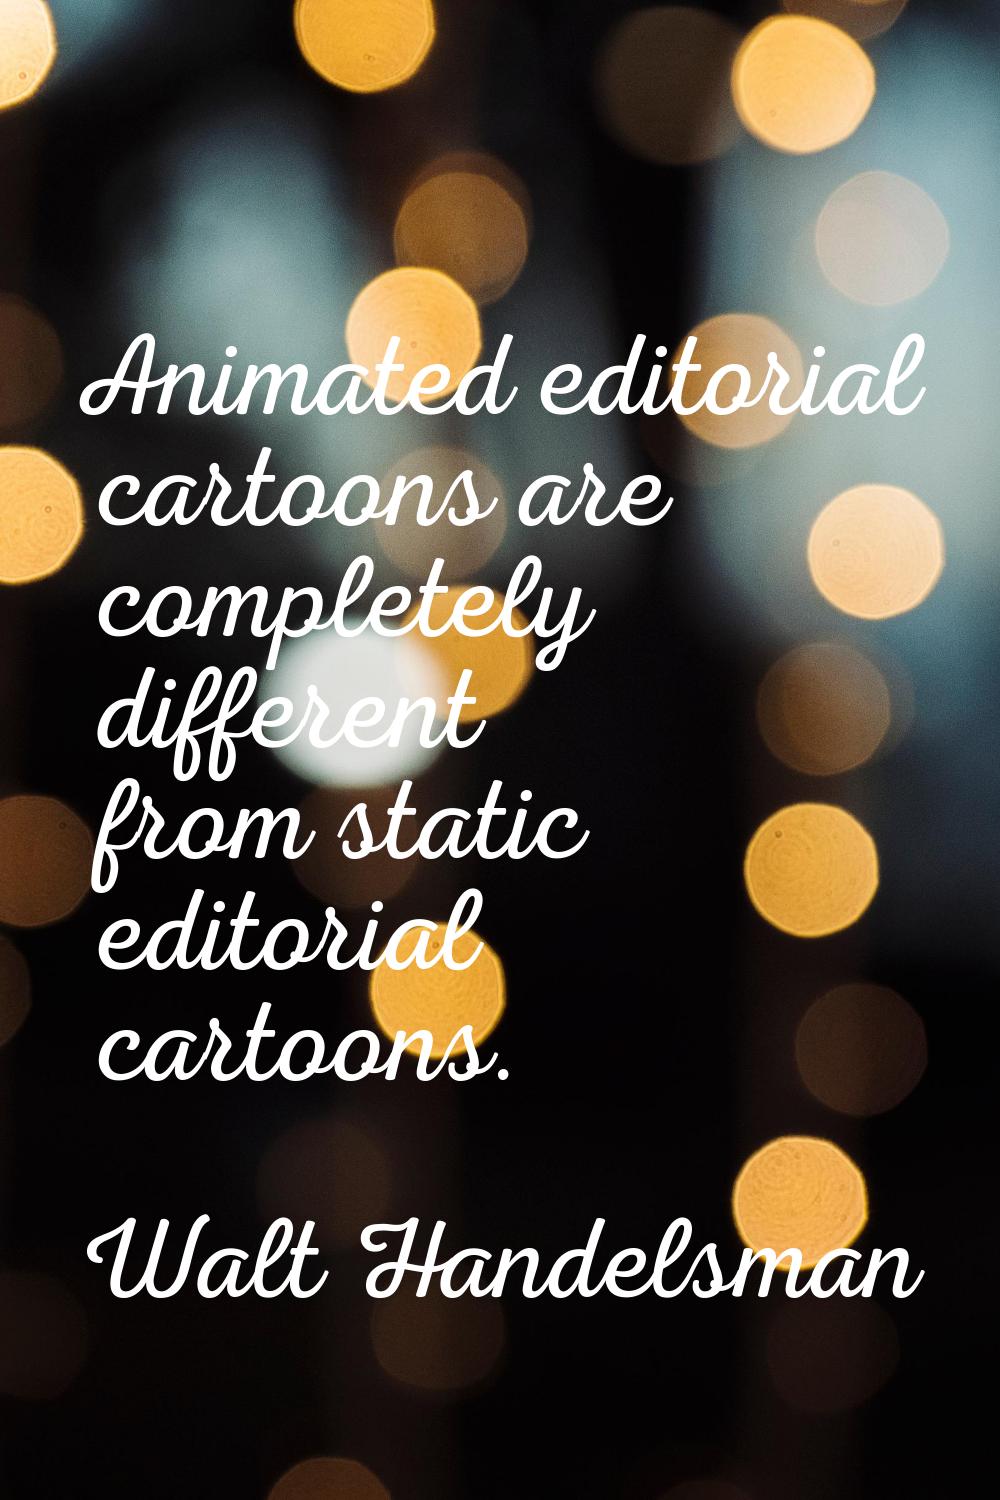 Animated editorial cartoons are completely different from static editorial cartoons.